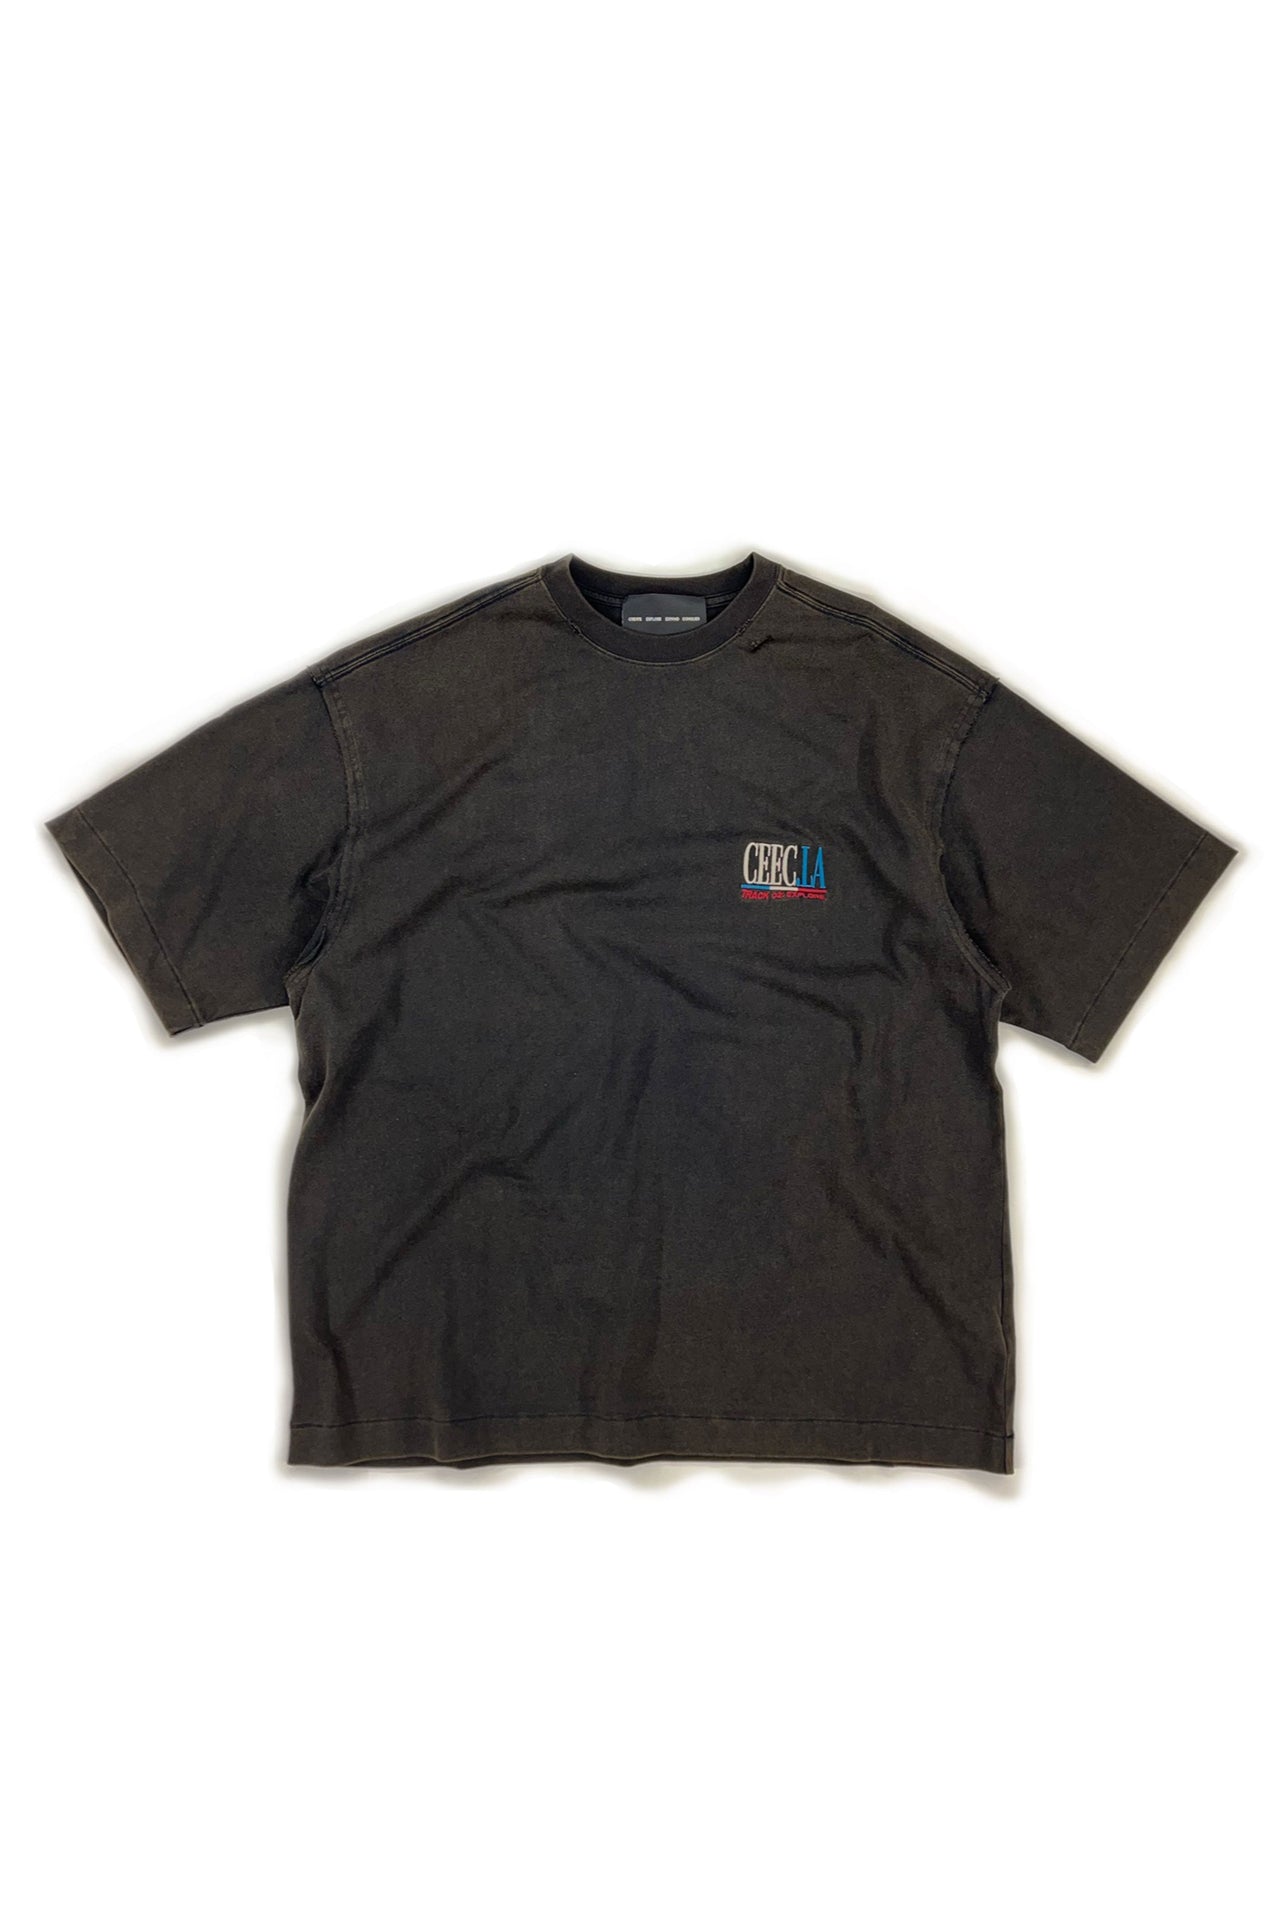 1st Anniversary "Call me if you see" Logo Tee in Black